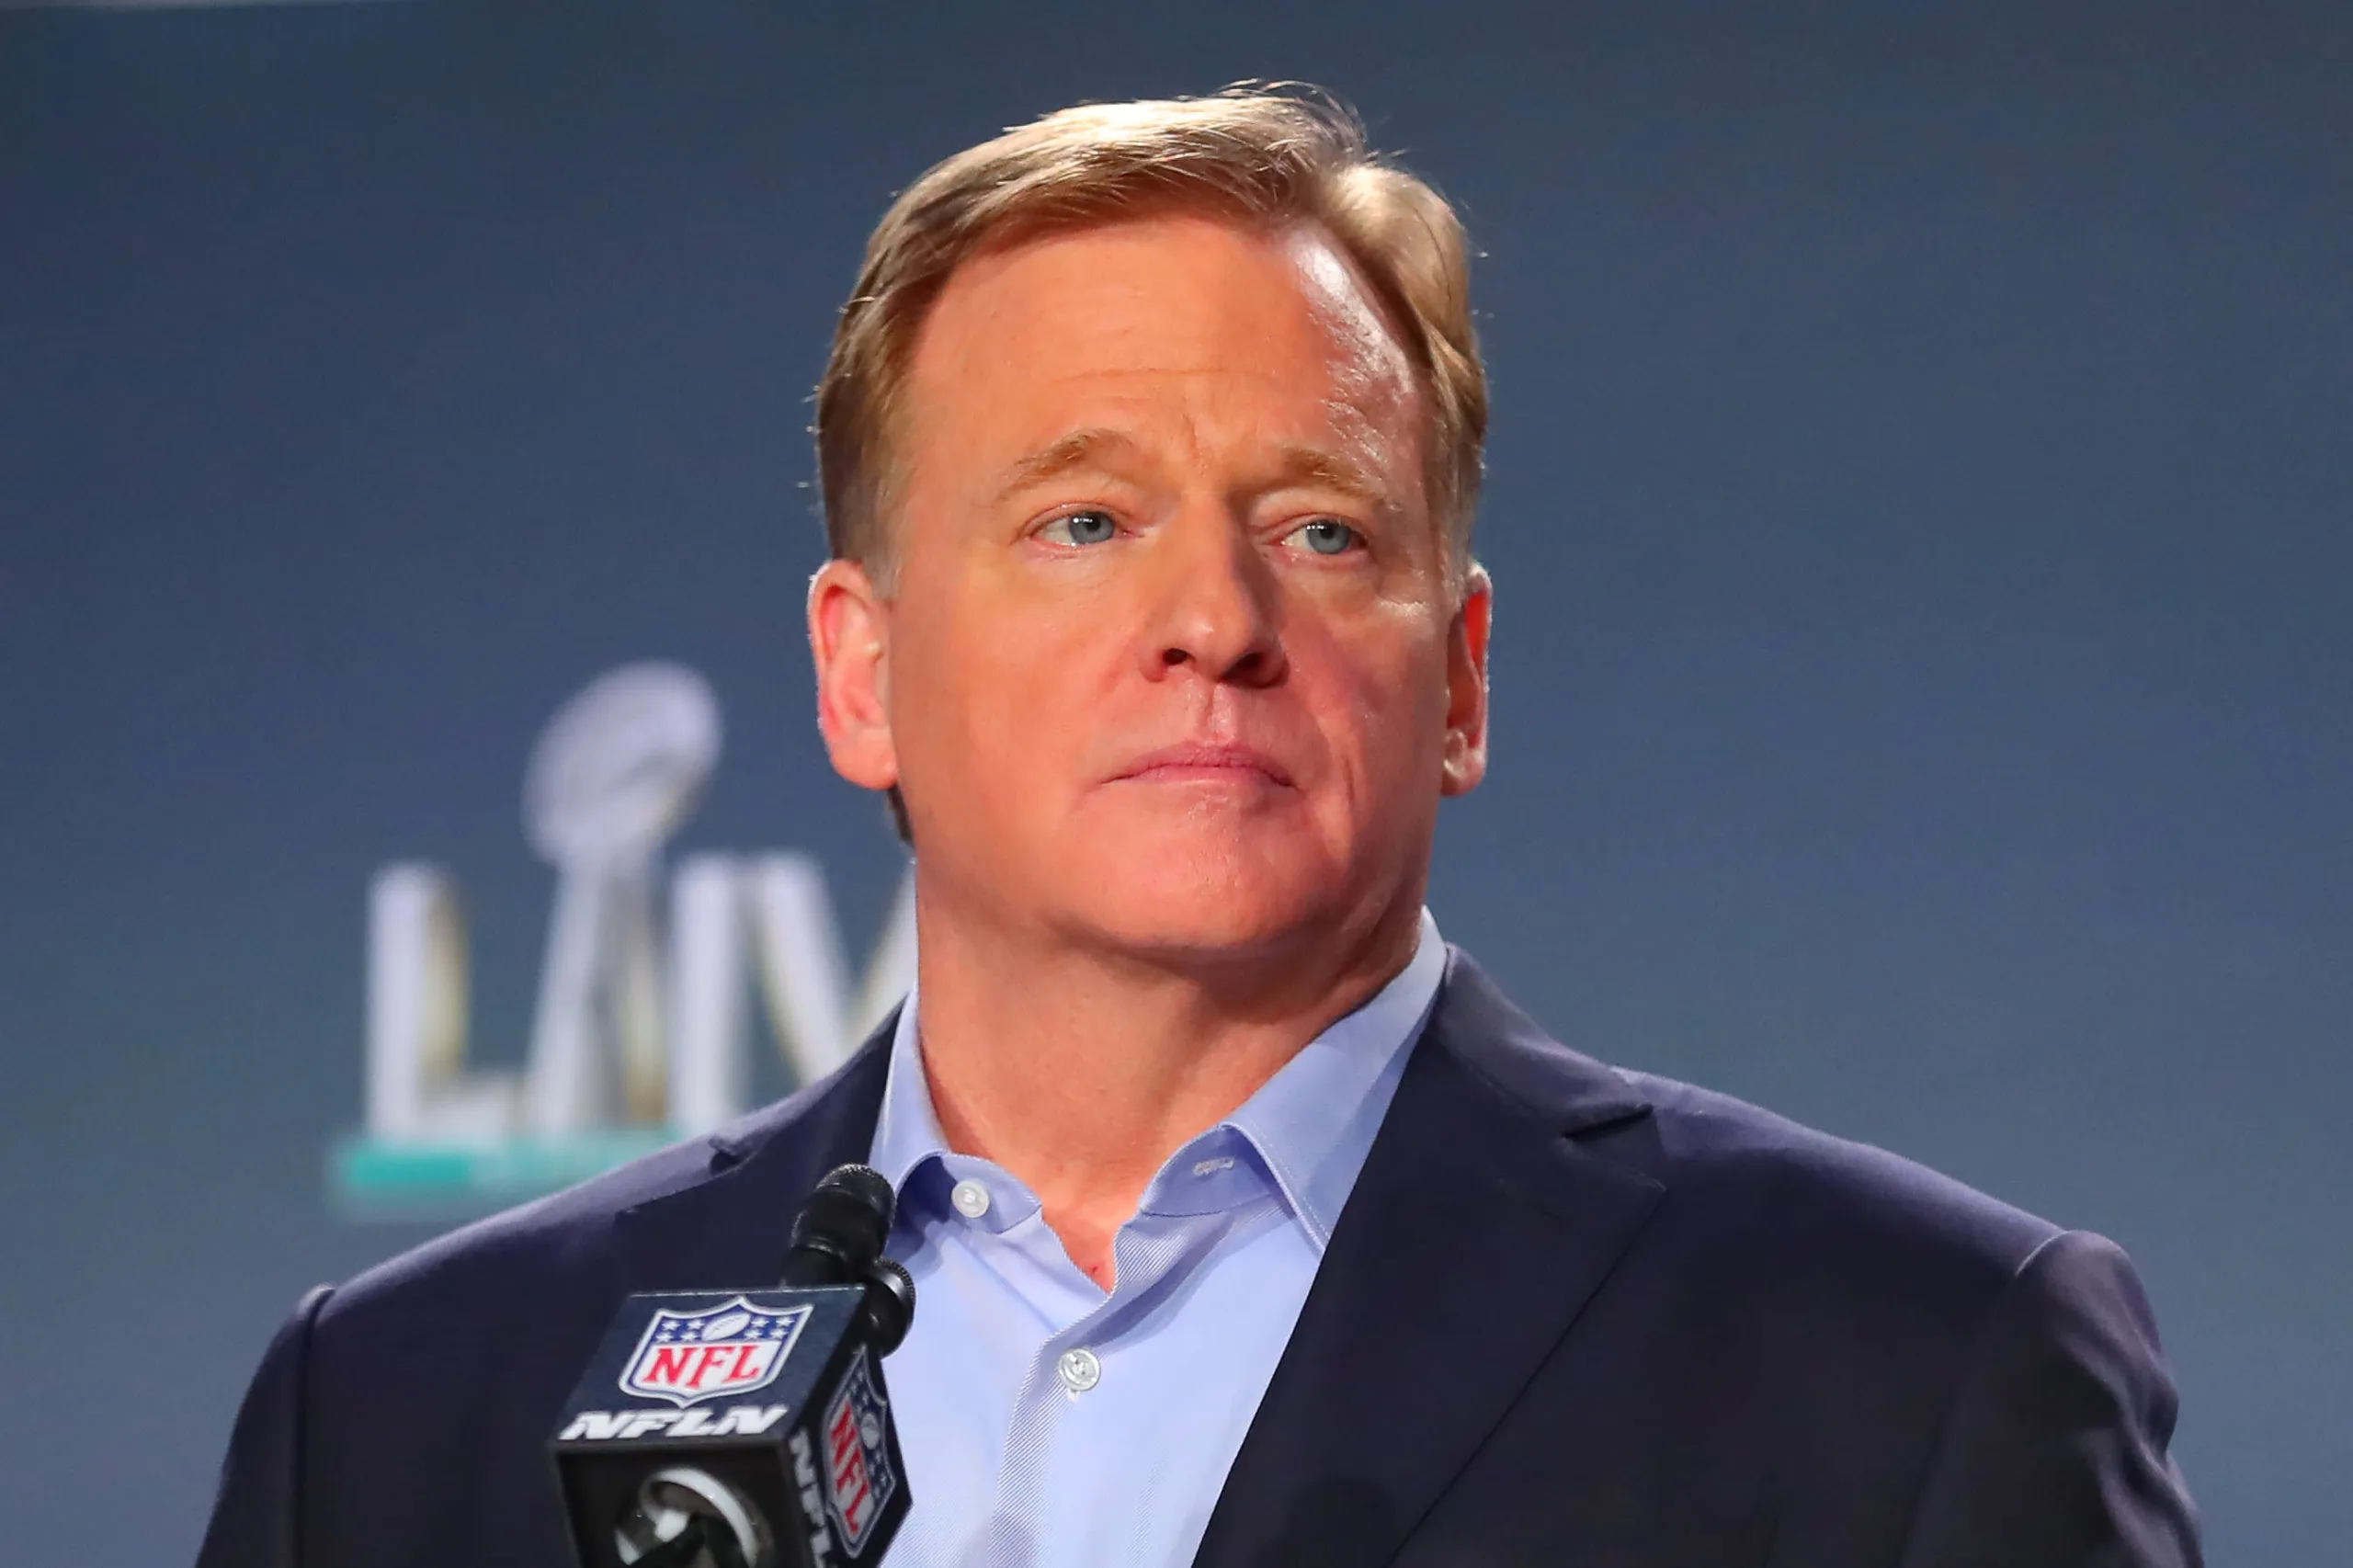 Roger Goodell, the commissioner of The National Football League, will welcome everyone to the 2024 NFL Draft in Detroit, Michigan, at 8 p.m. Eastern, 7 p.m. Central. (Photo courtesy of YAHOO! SPORTS)